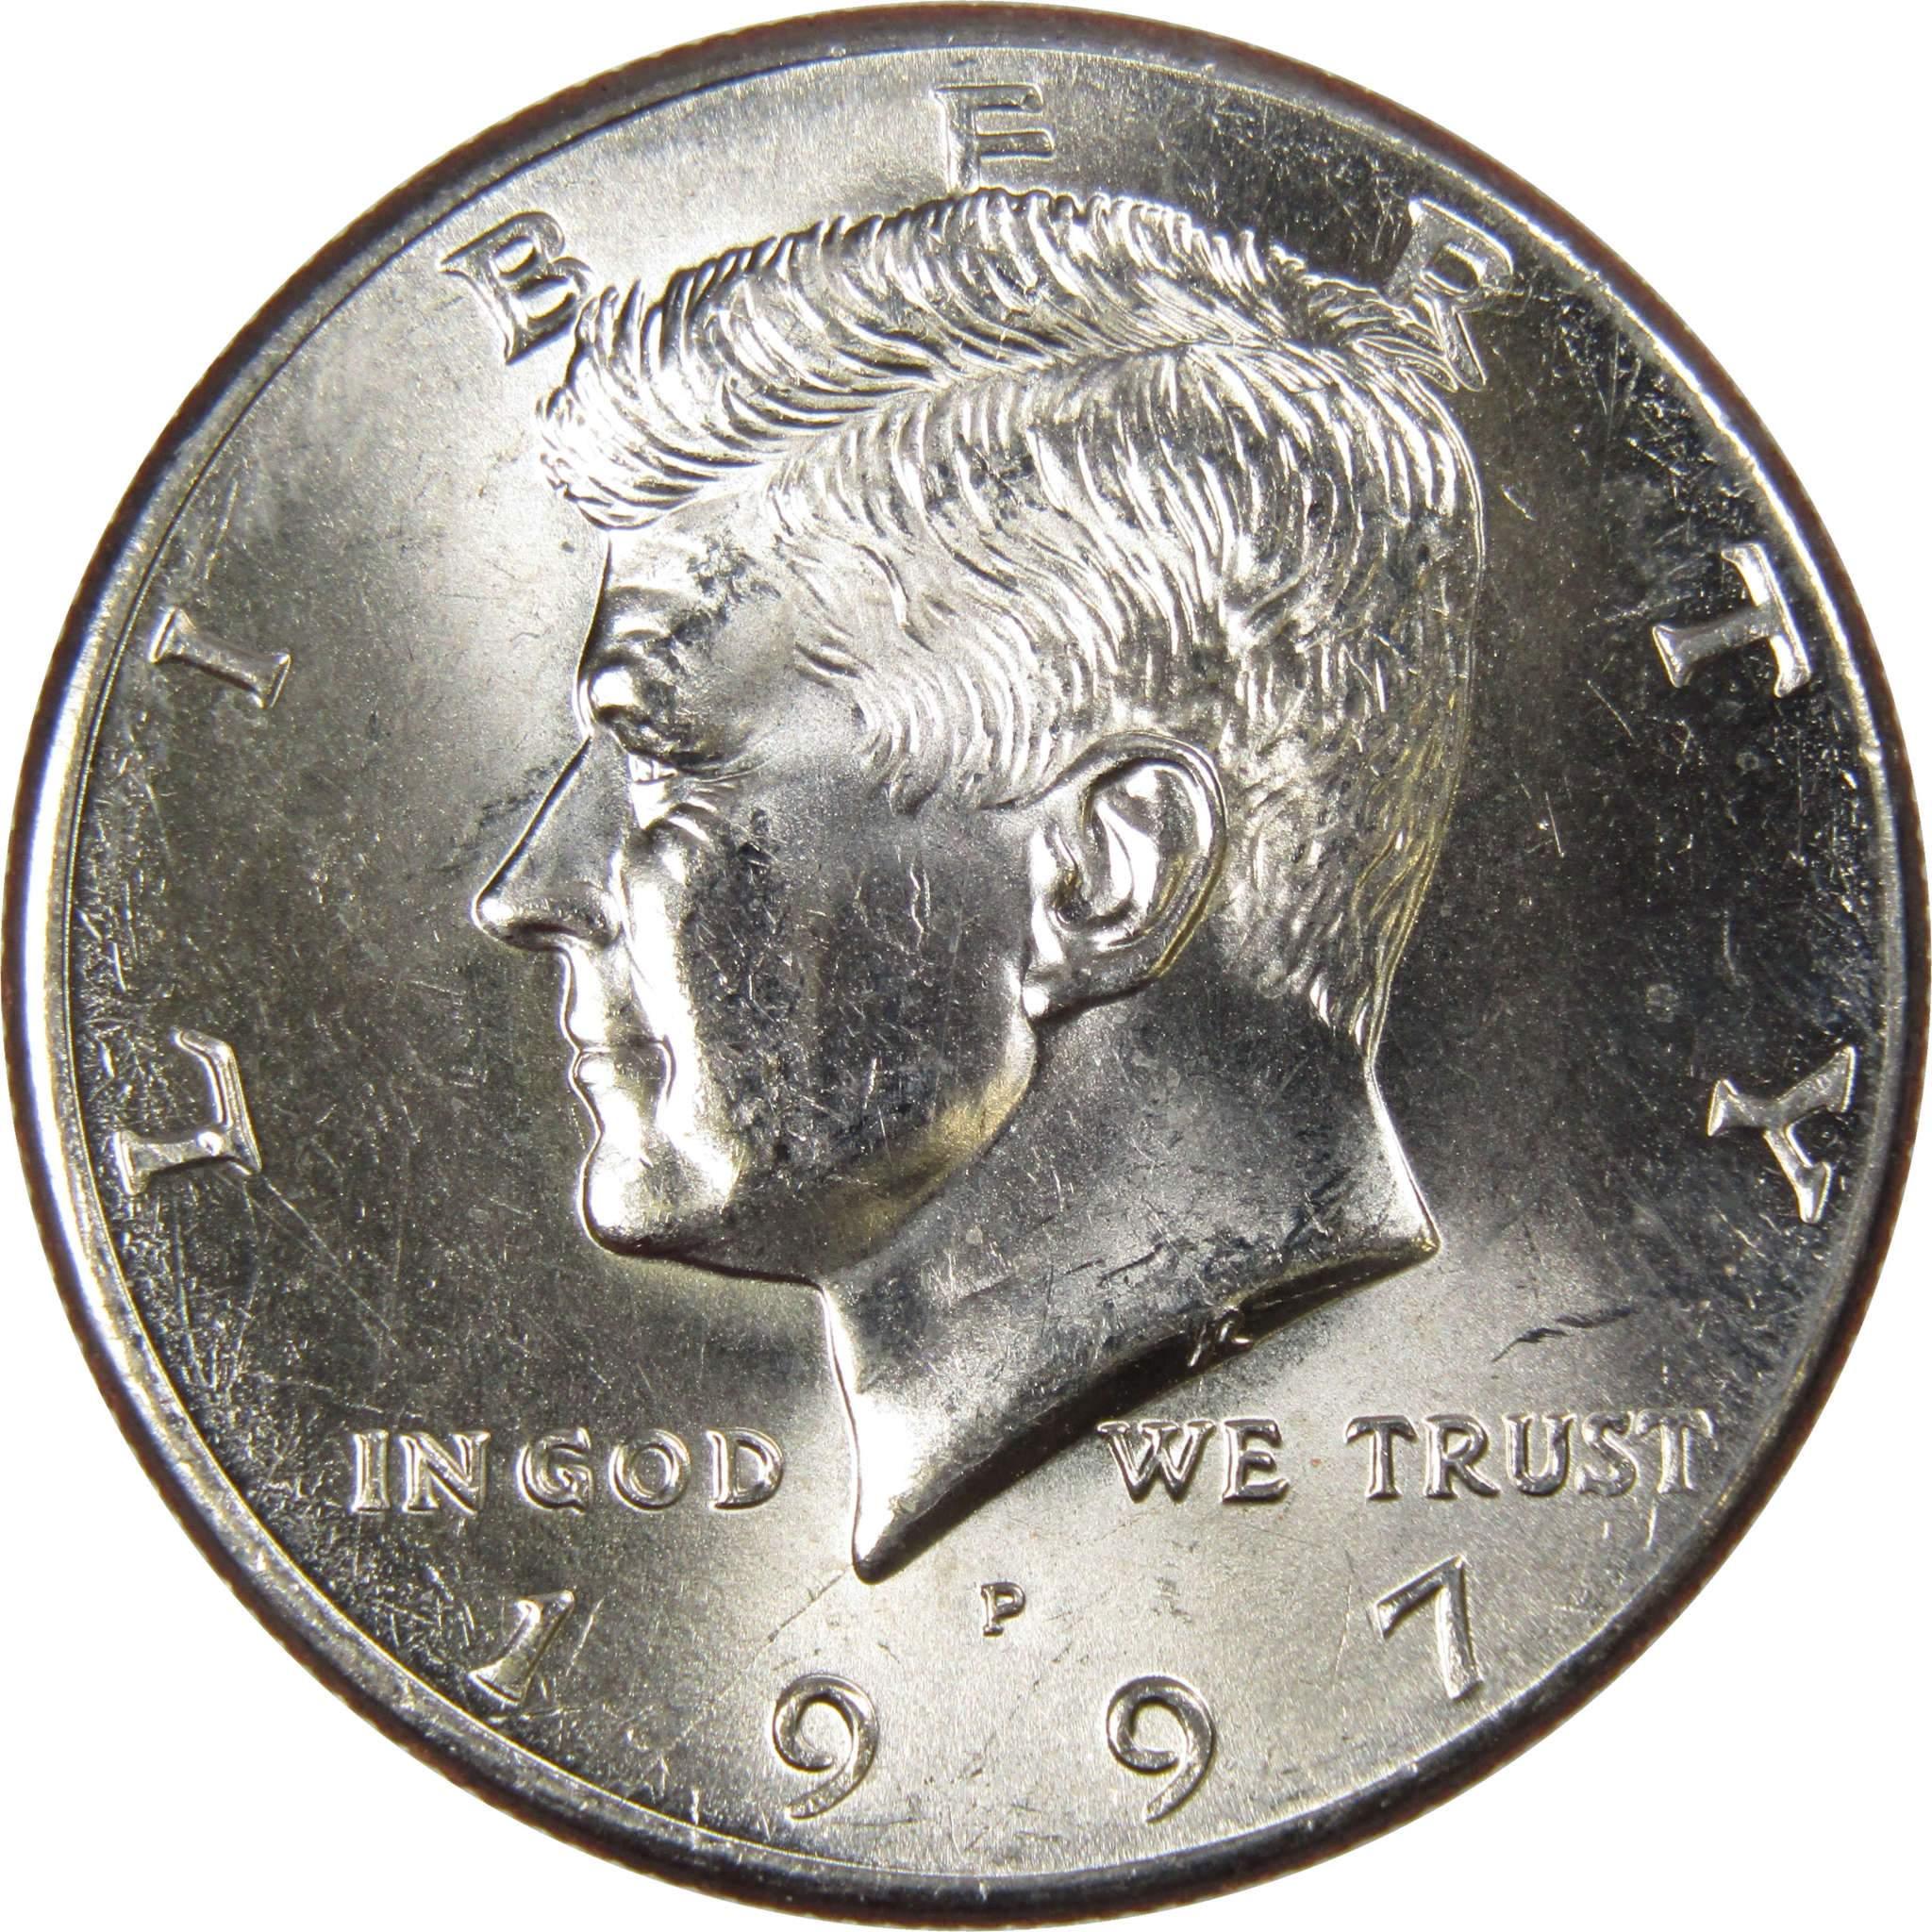 1997 P Kennedy Half Dollar BU Uncirculated Mint State 50c US Coin Collectible